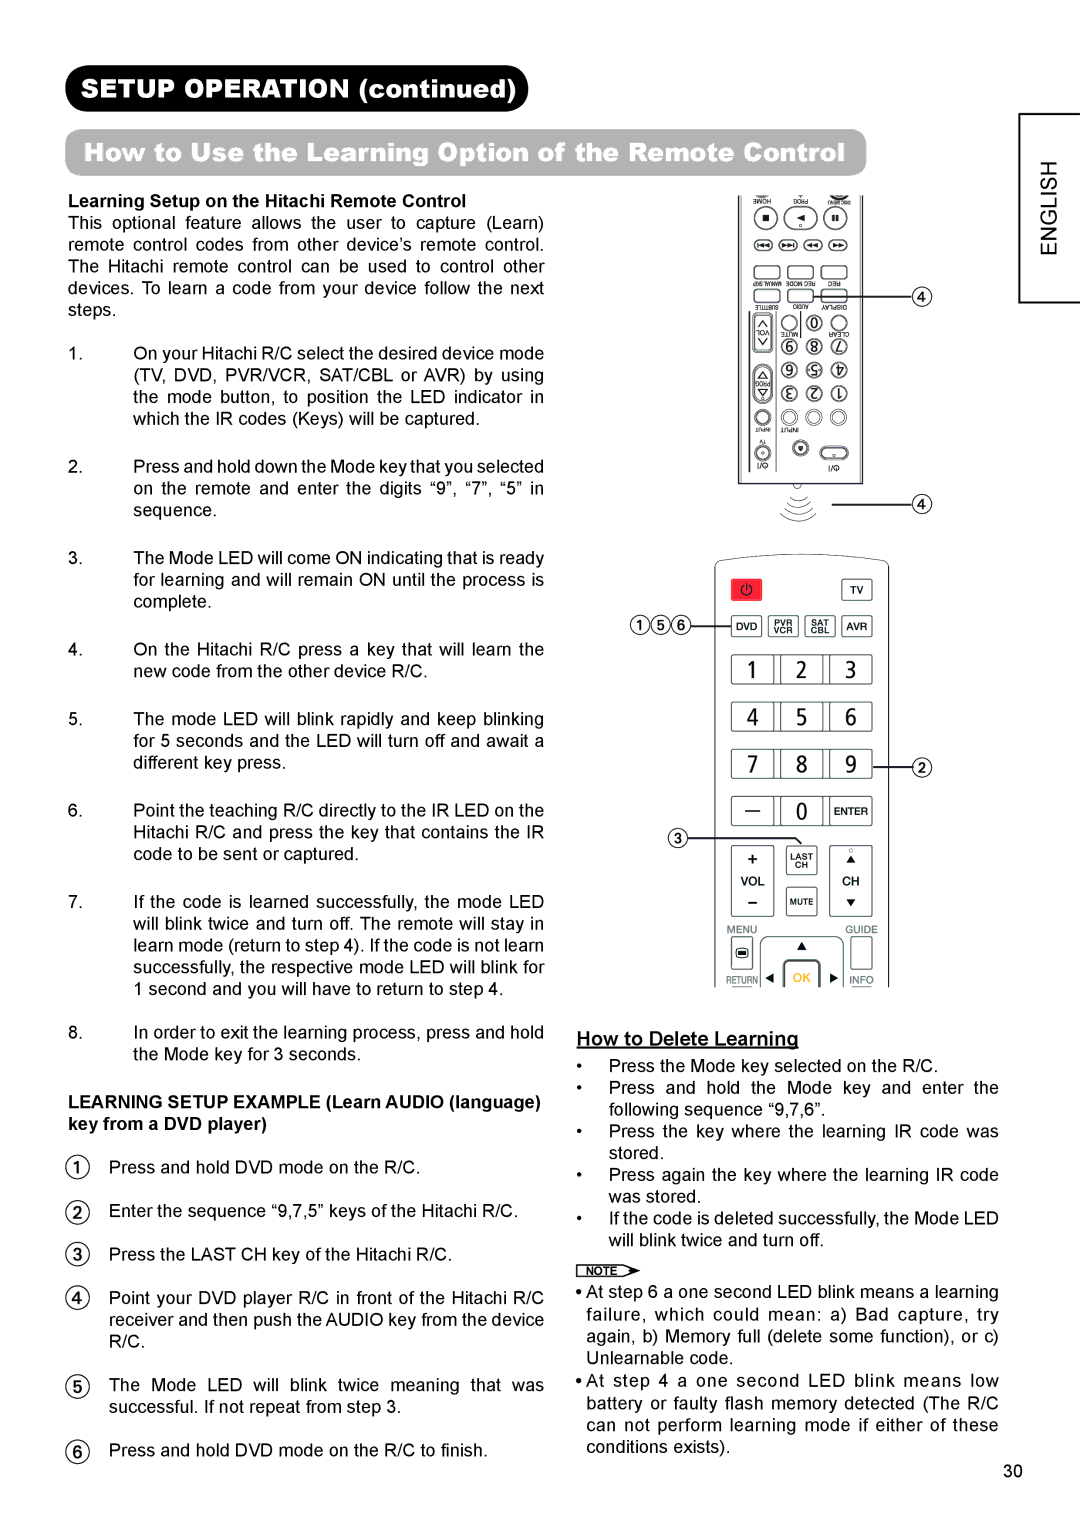 Hitachi UT32X802 manual How to Delete Learning, Learning Setup on the Hitachi Remote Control 